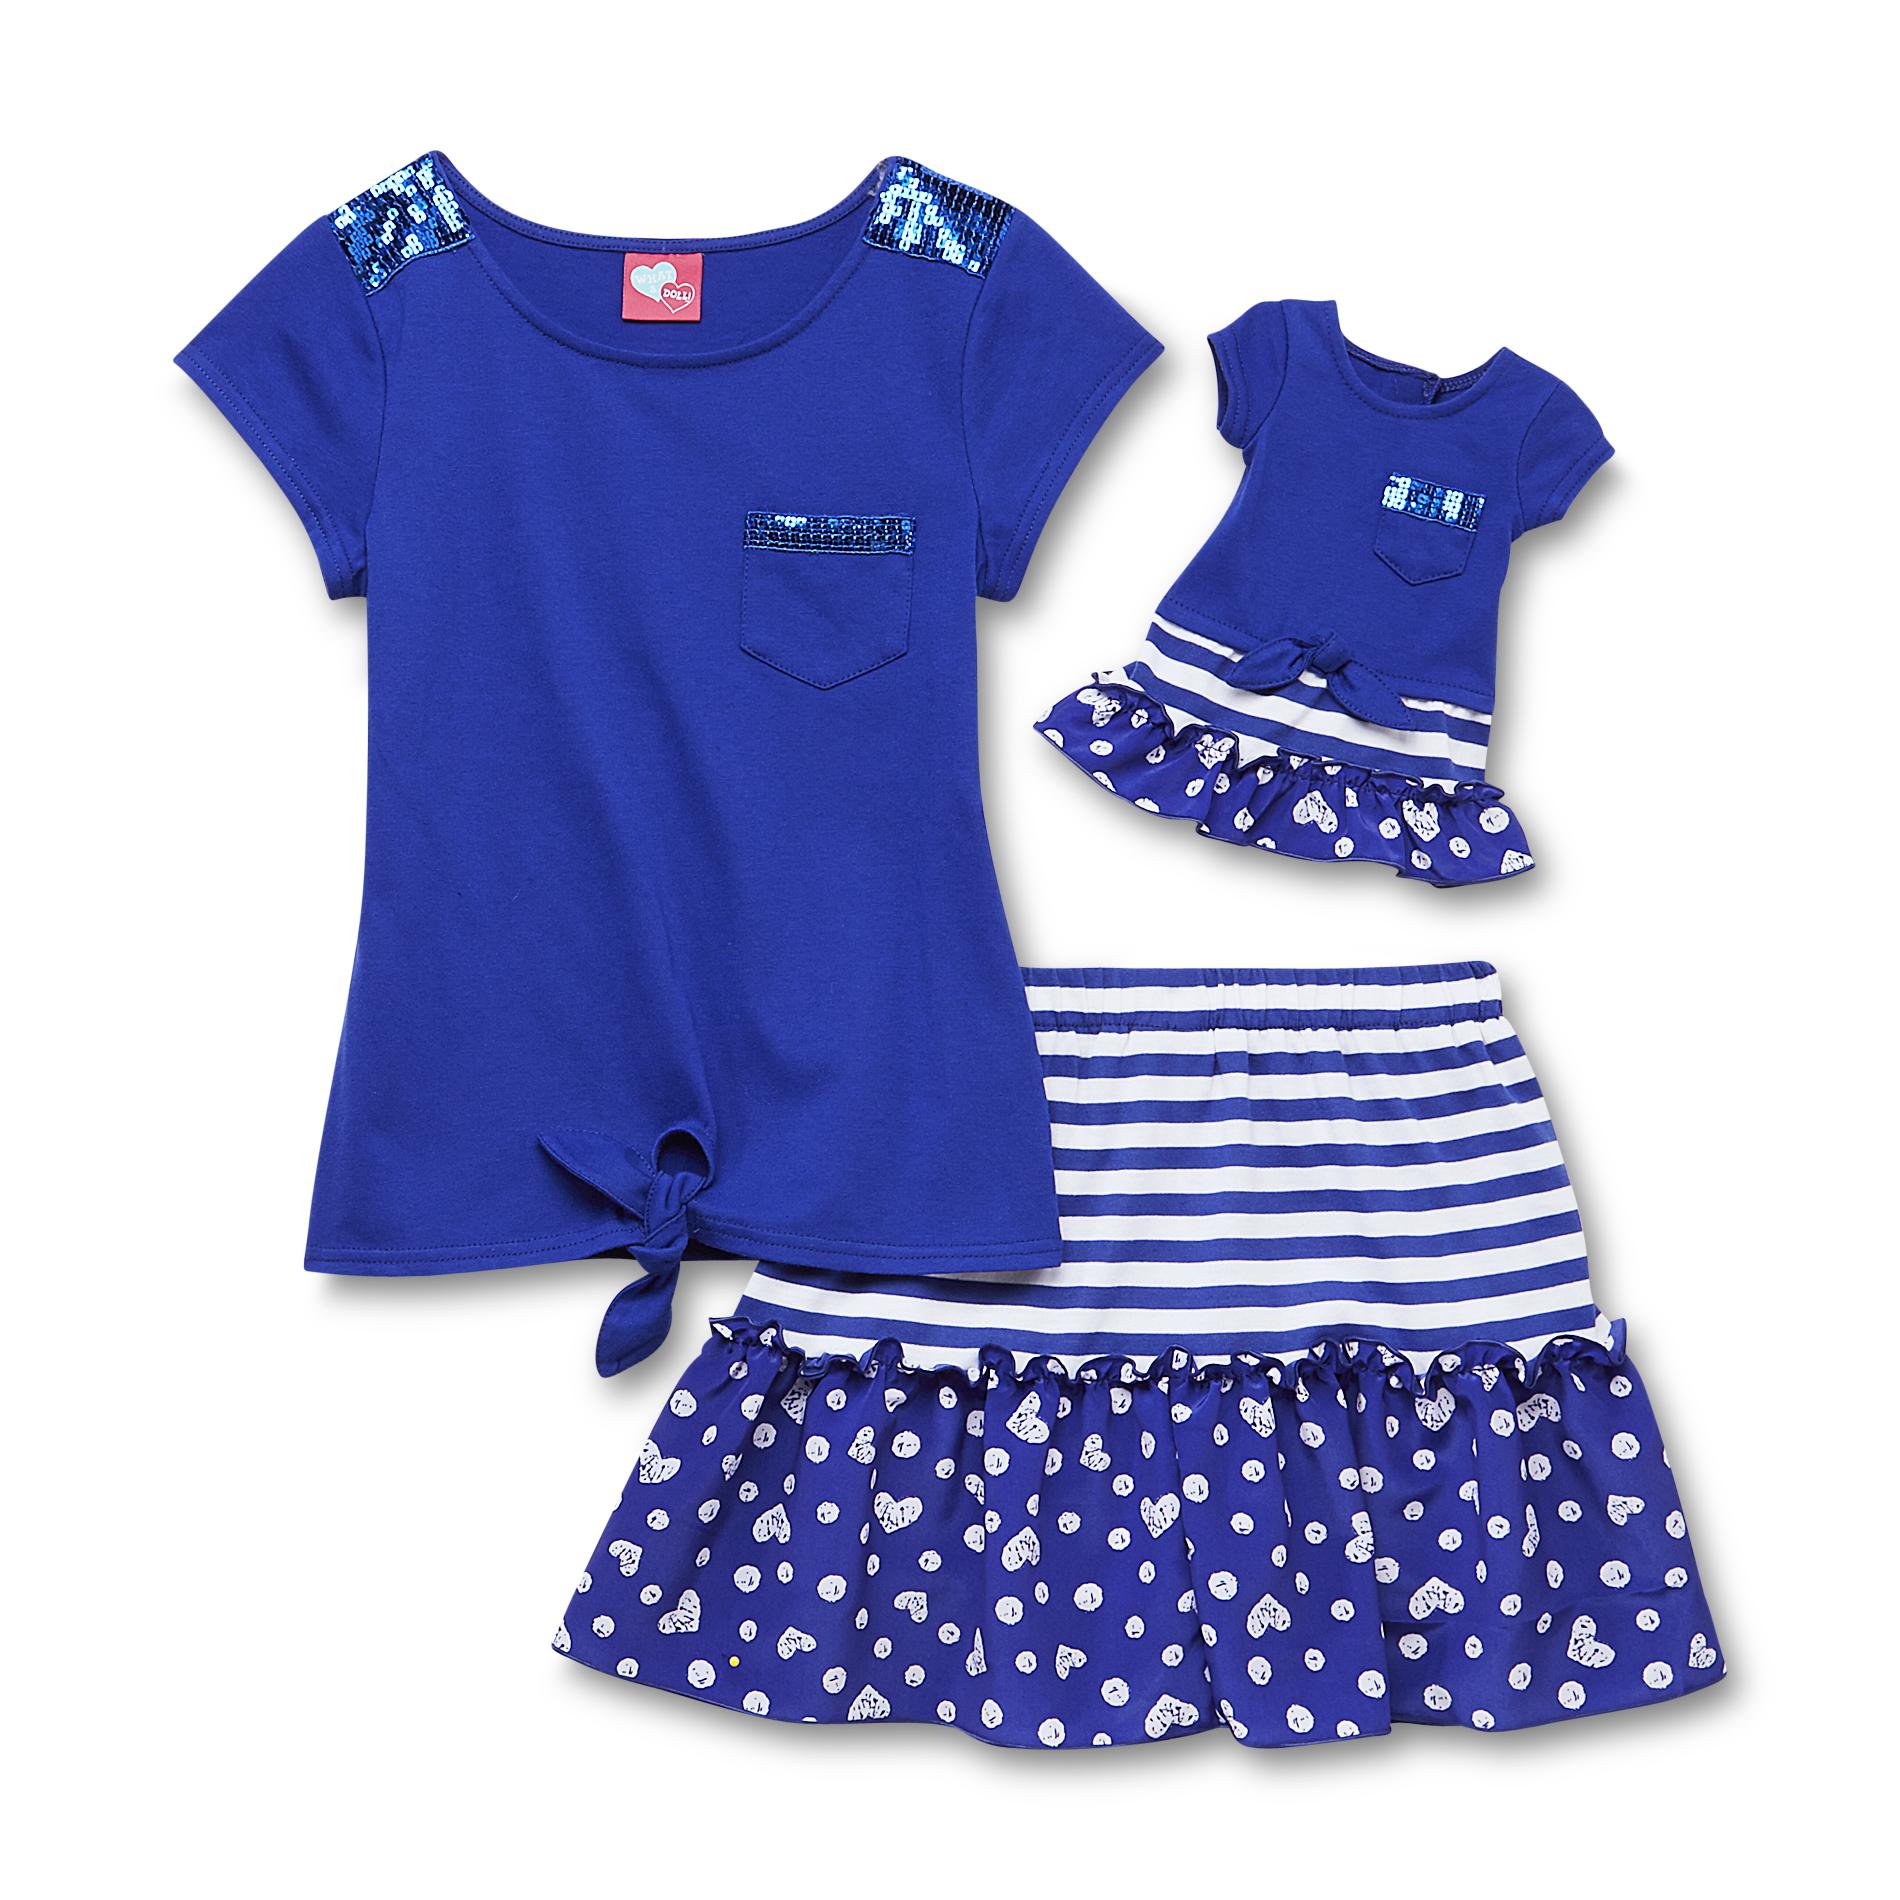 What A Doll Girl's Top  Scooter Skirt & Doll Outfit - Stripe & Hearts